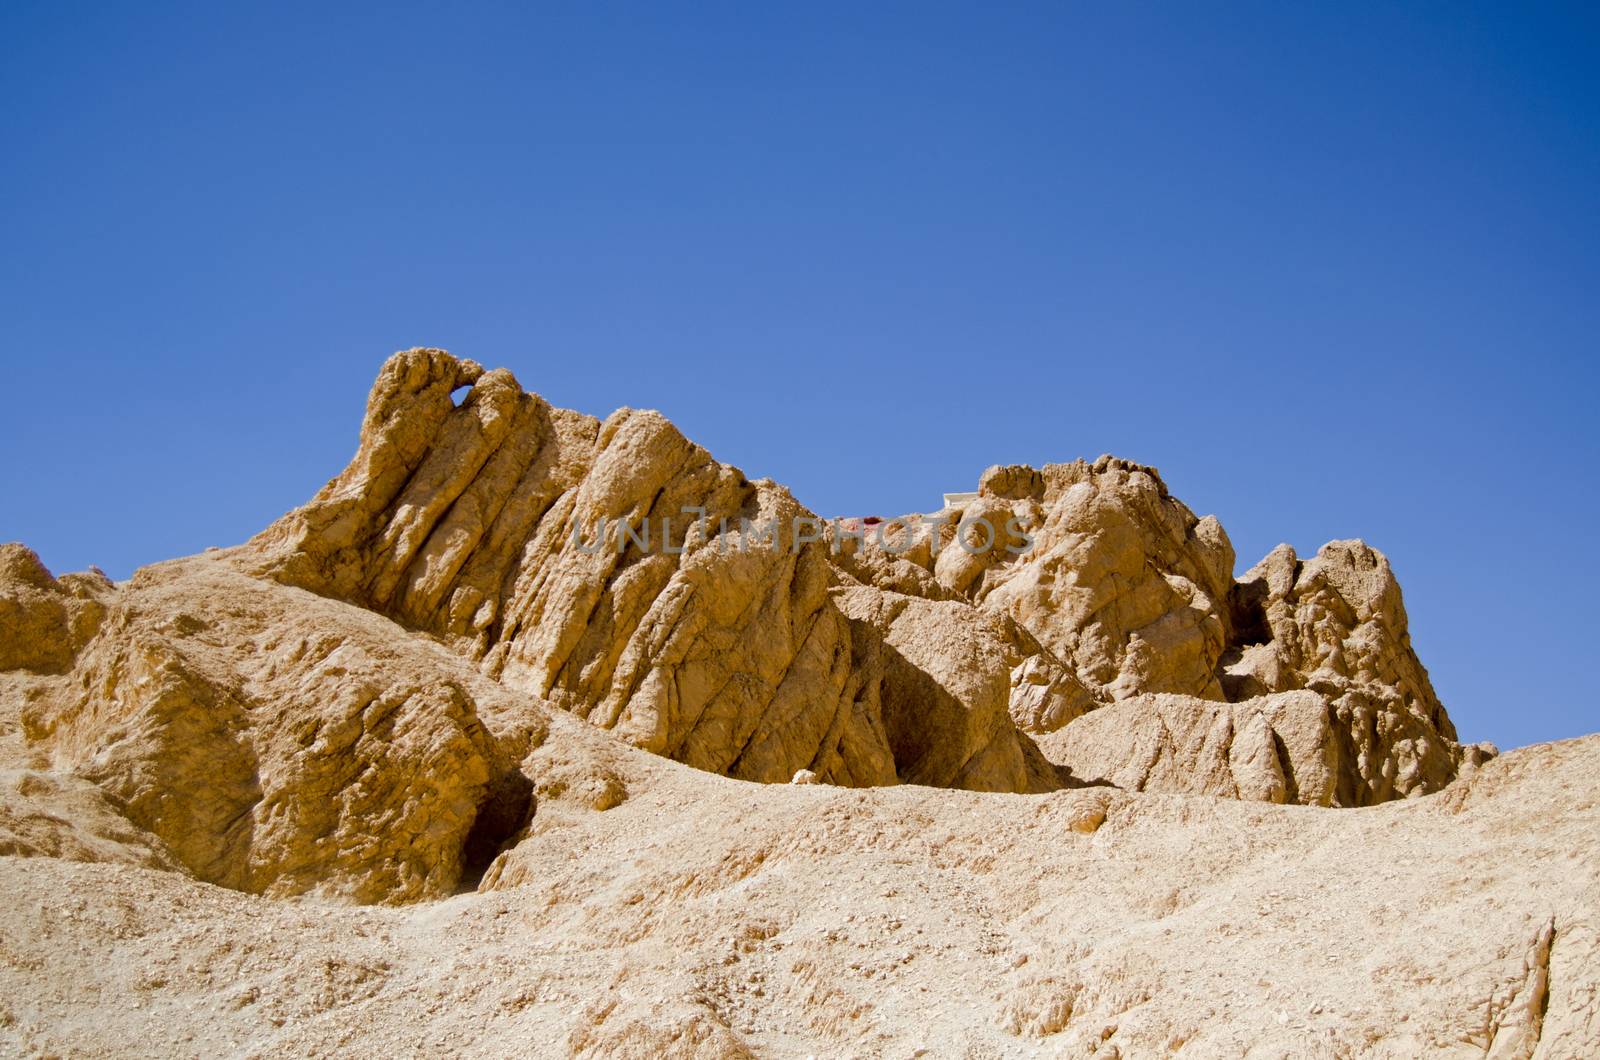 A distinctive rock formation in the Valley of the Queens, part of the Western Desert of Egypt near Luxor.